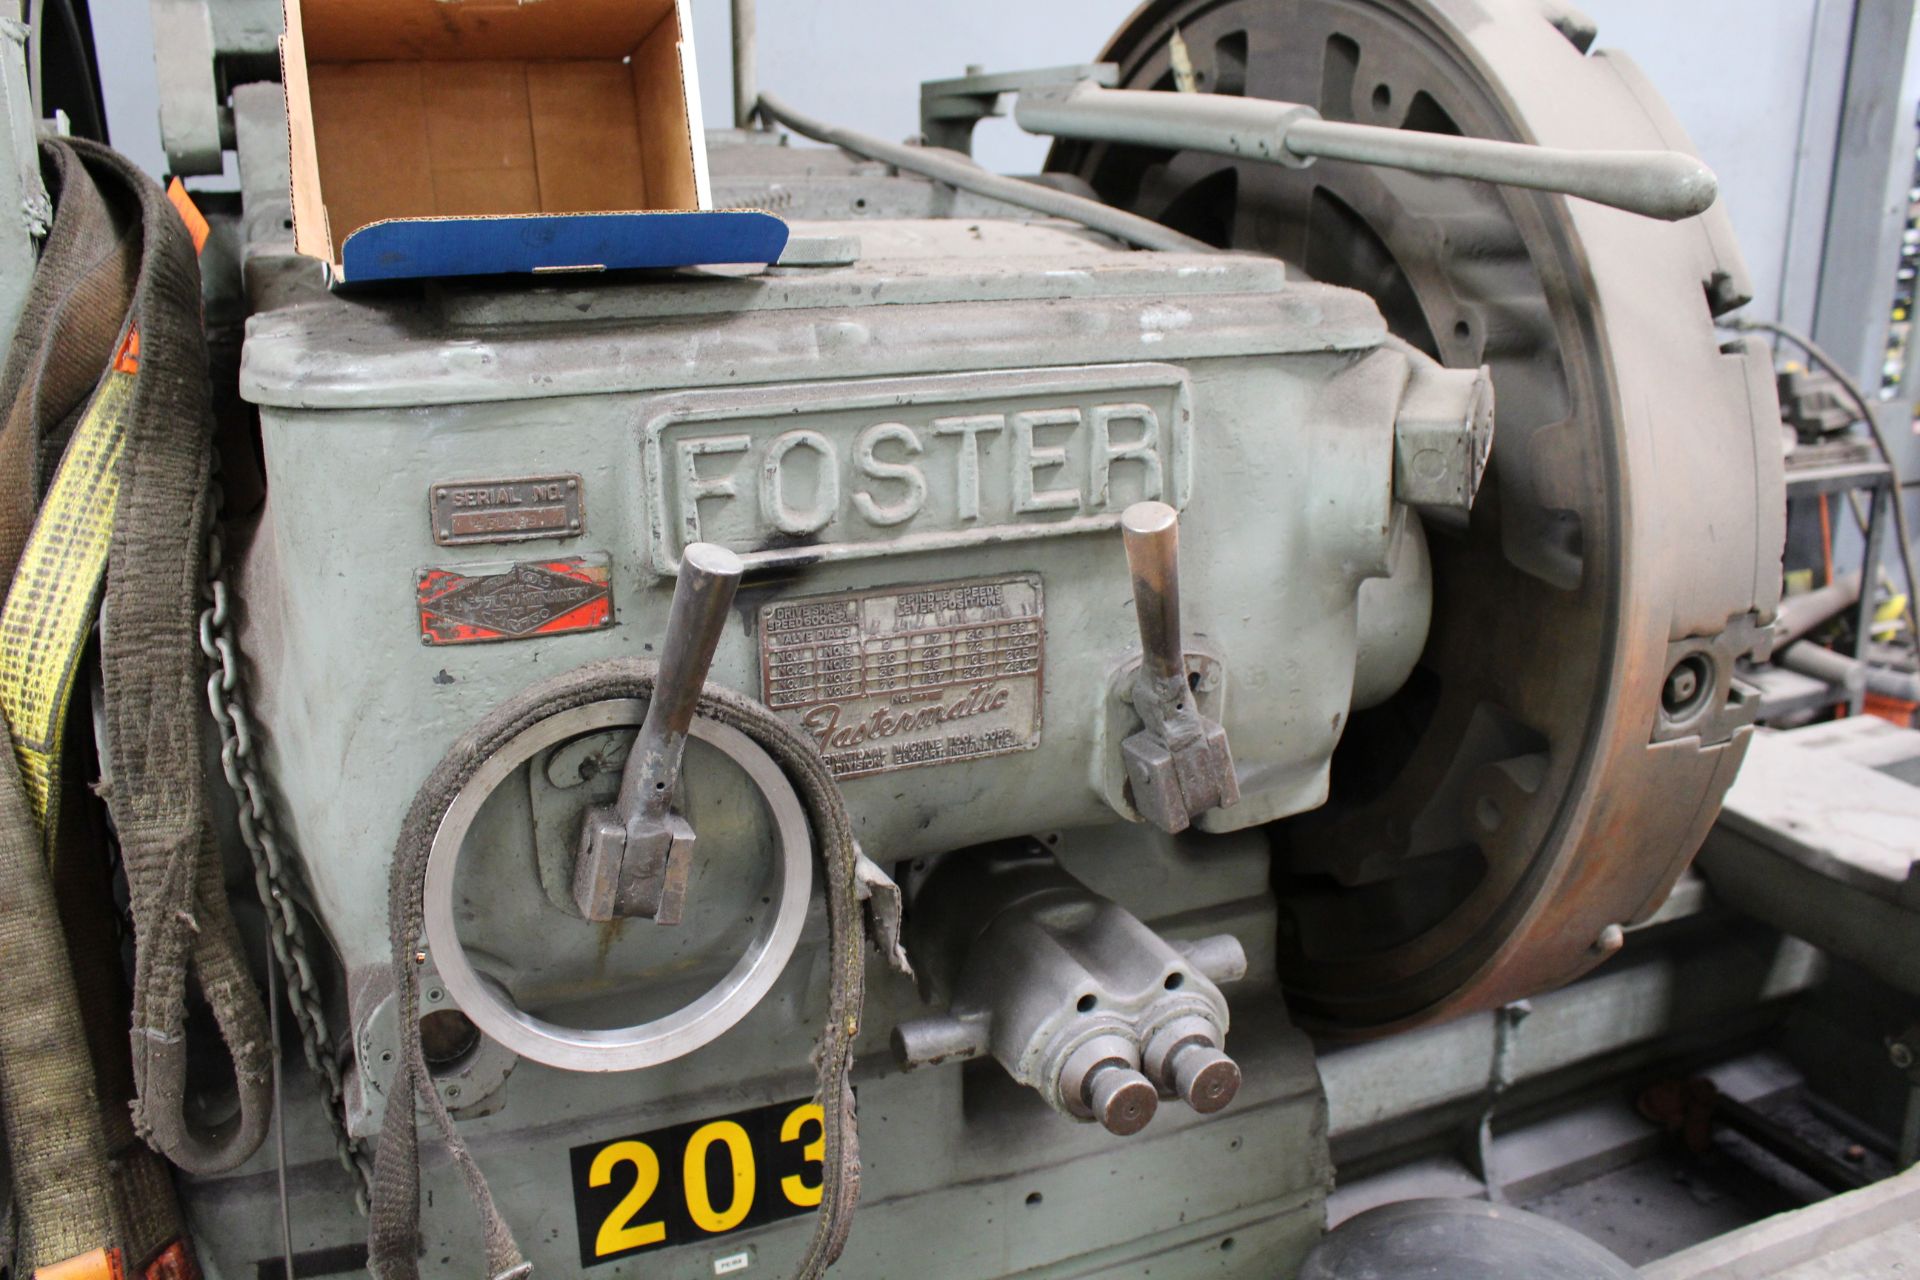 FOSTER ENGINE LATHE, 66" x 84" CCS, 42" 4 JAW CHUCK, CROSS SLIDE, TAILSTOCK, 9-484 RPM, S/N: 4FU199 - Image 5 of 6